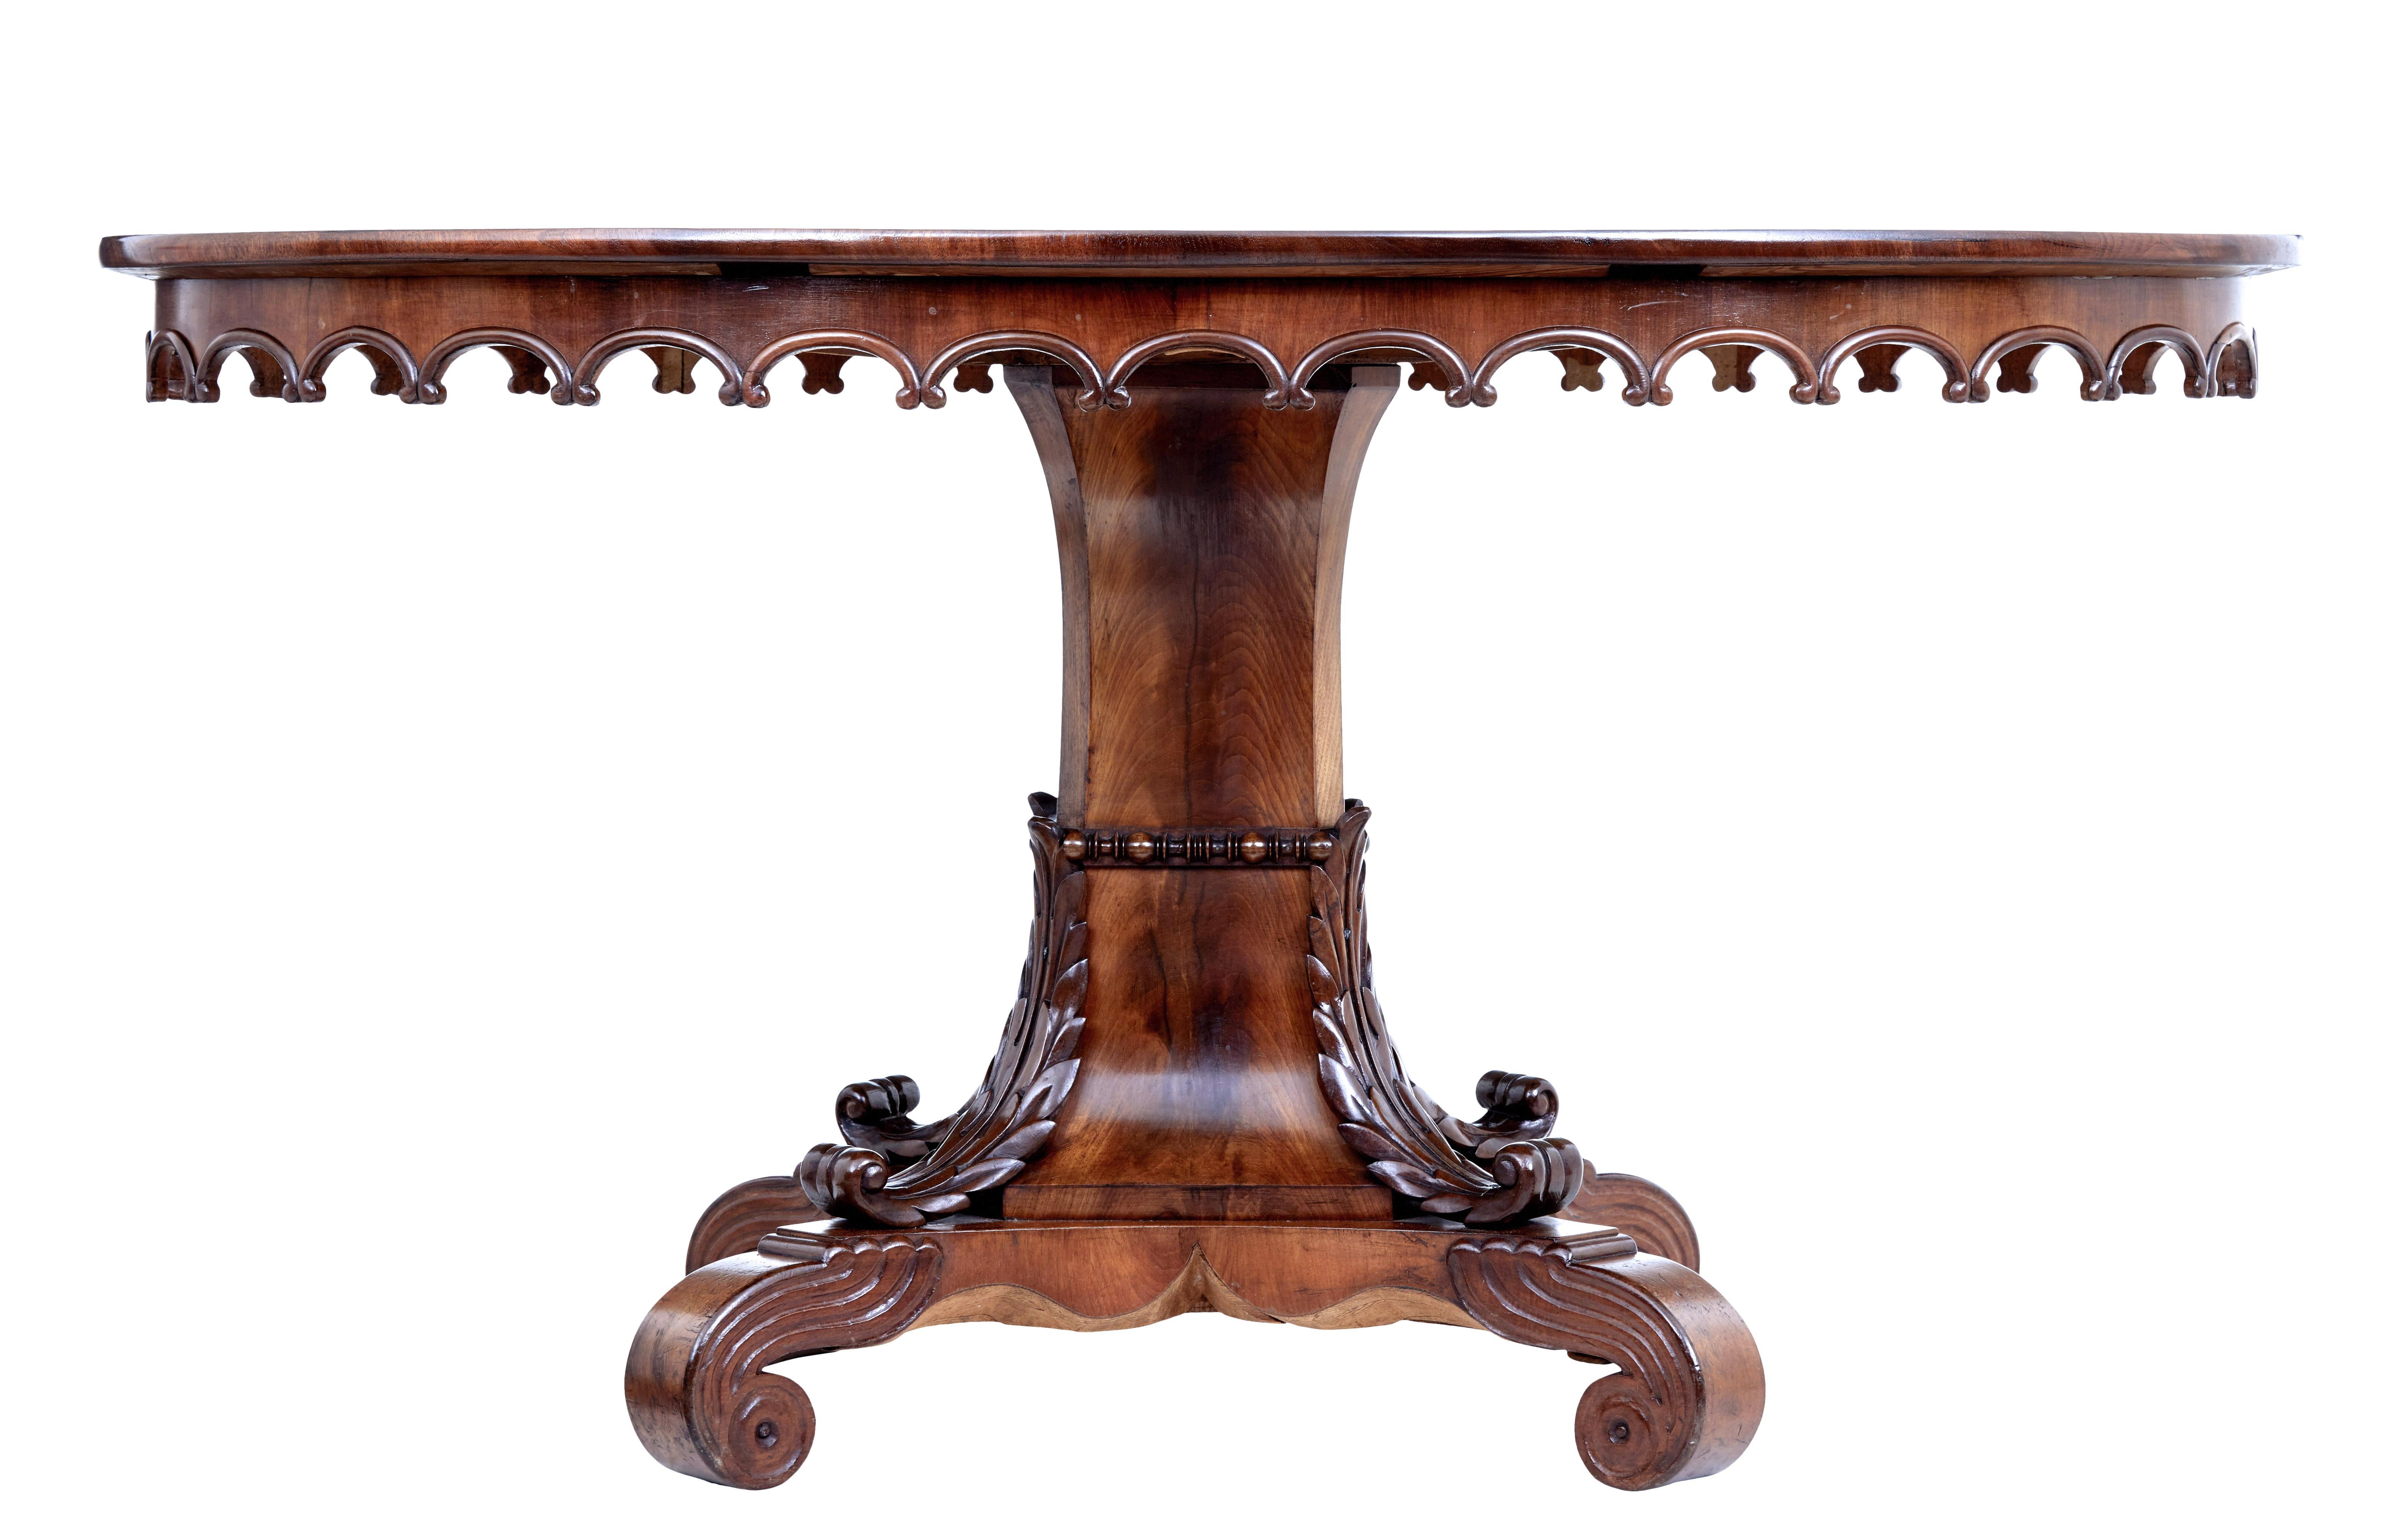 Mid 19th century carved flame mahogany oval center table, circa 1860.

Beautiful Swedish mahogany table. Oval top with matched quarter veneers in flame mahogany, decorative carved frieze below the top surface. Pedestal base with stunning applied